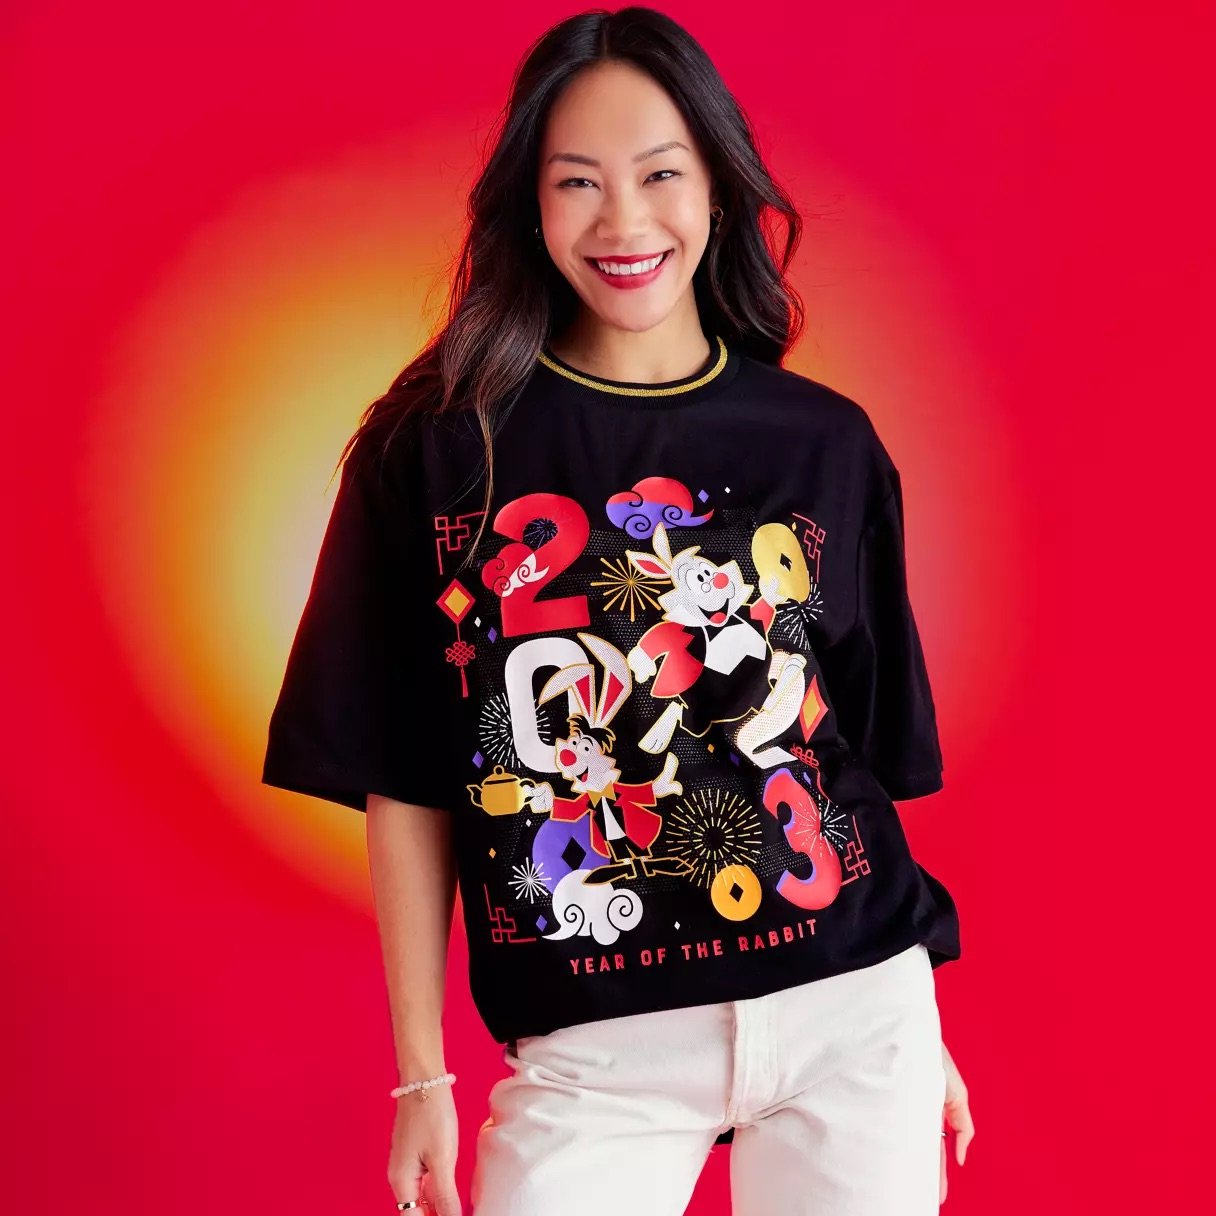 Shop the 20 Year of the Rabbit Lunar New Year 2023 finds